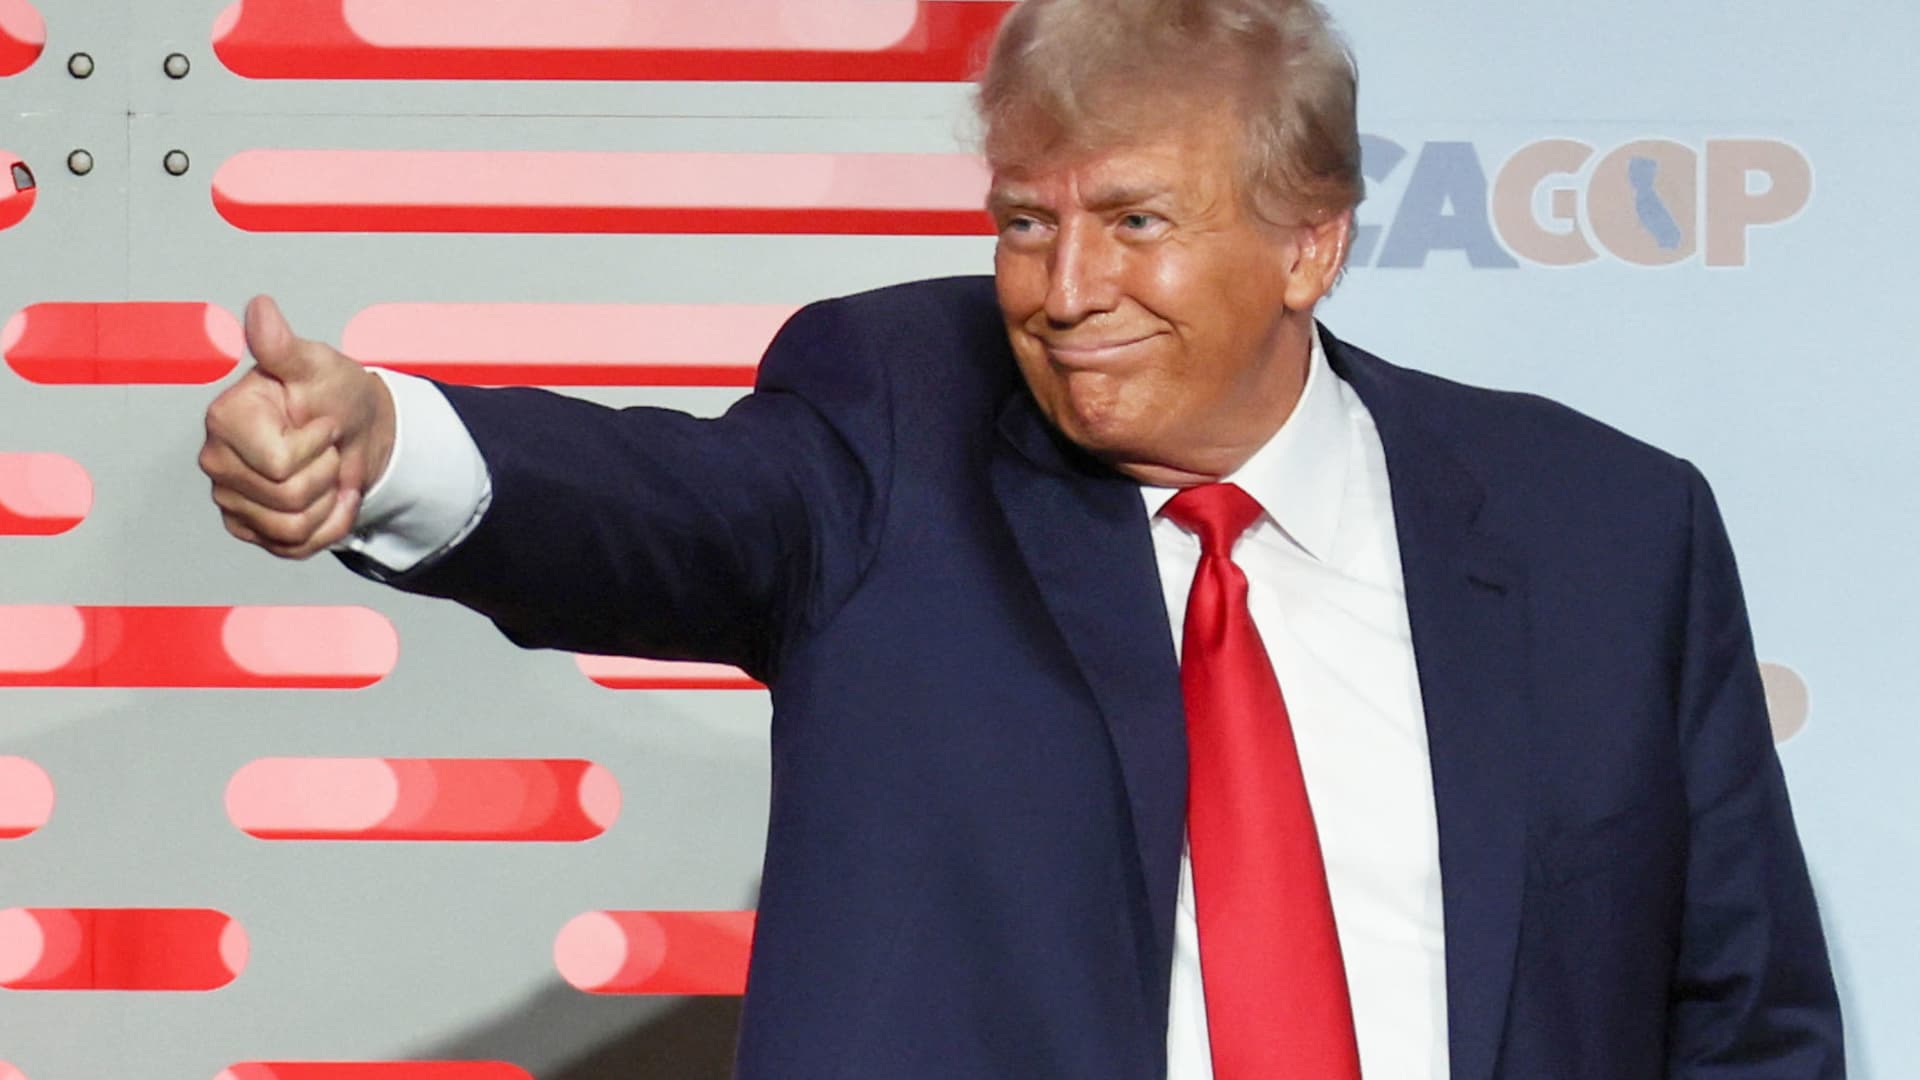 Former U.S. President and Republican presidential candidate Donald Trump gestures after his speech at the fall convention of the California Republican Party in Anaheim, California, September 29, 2023.